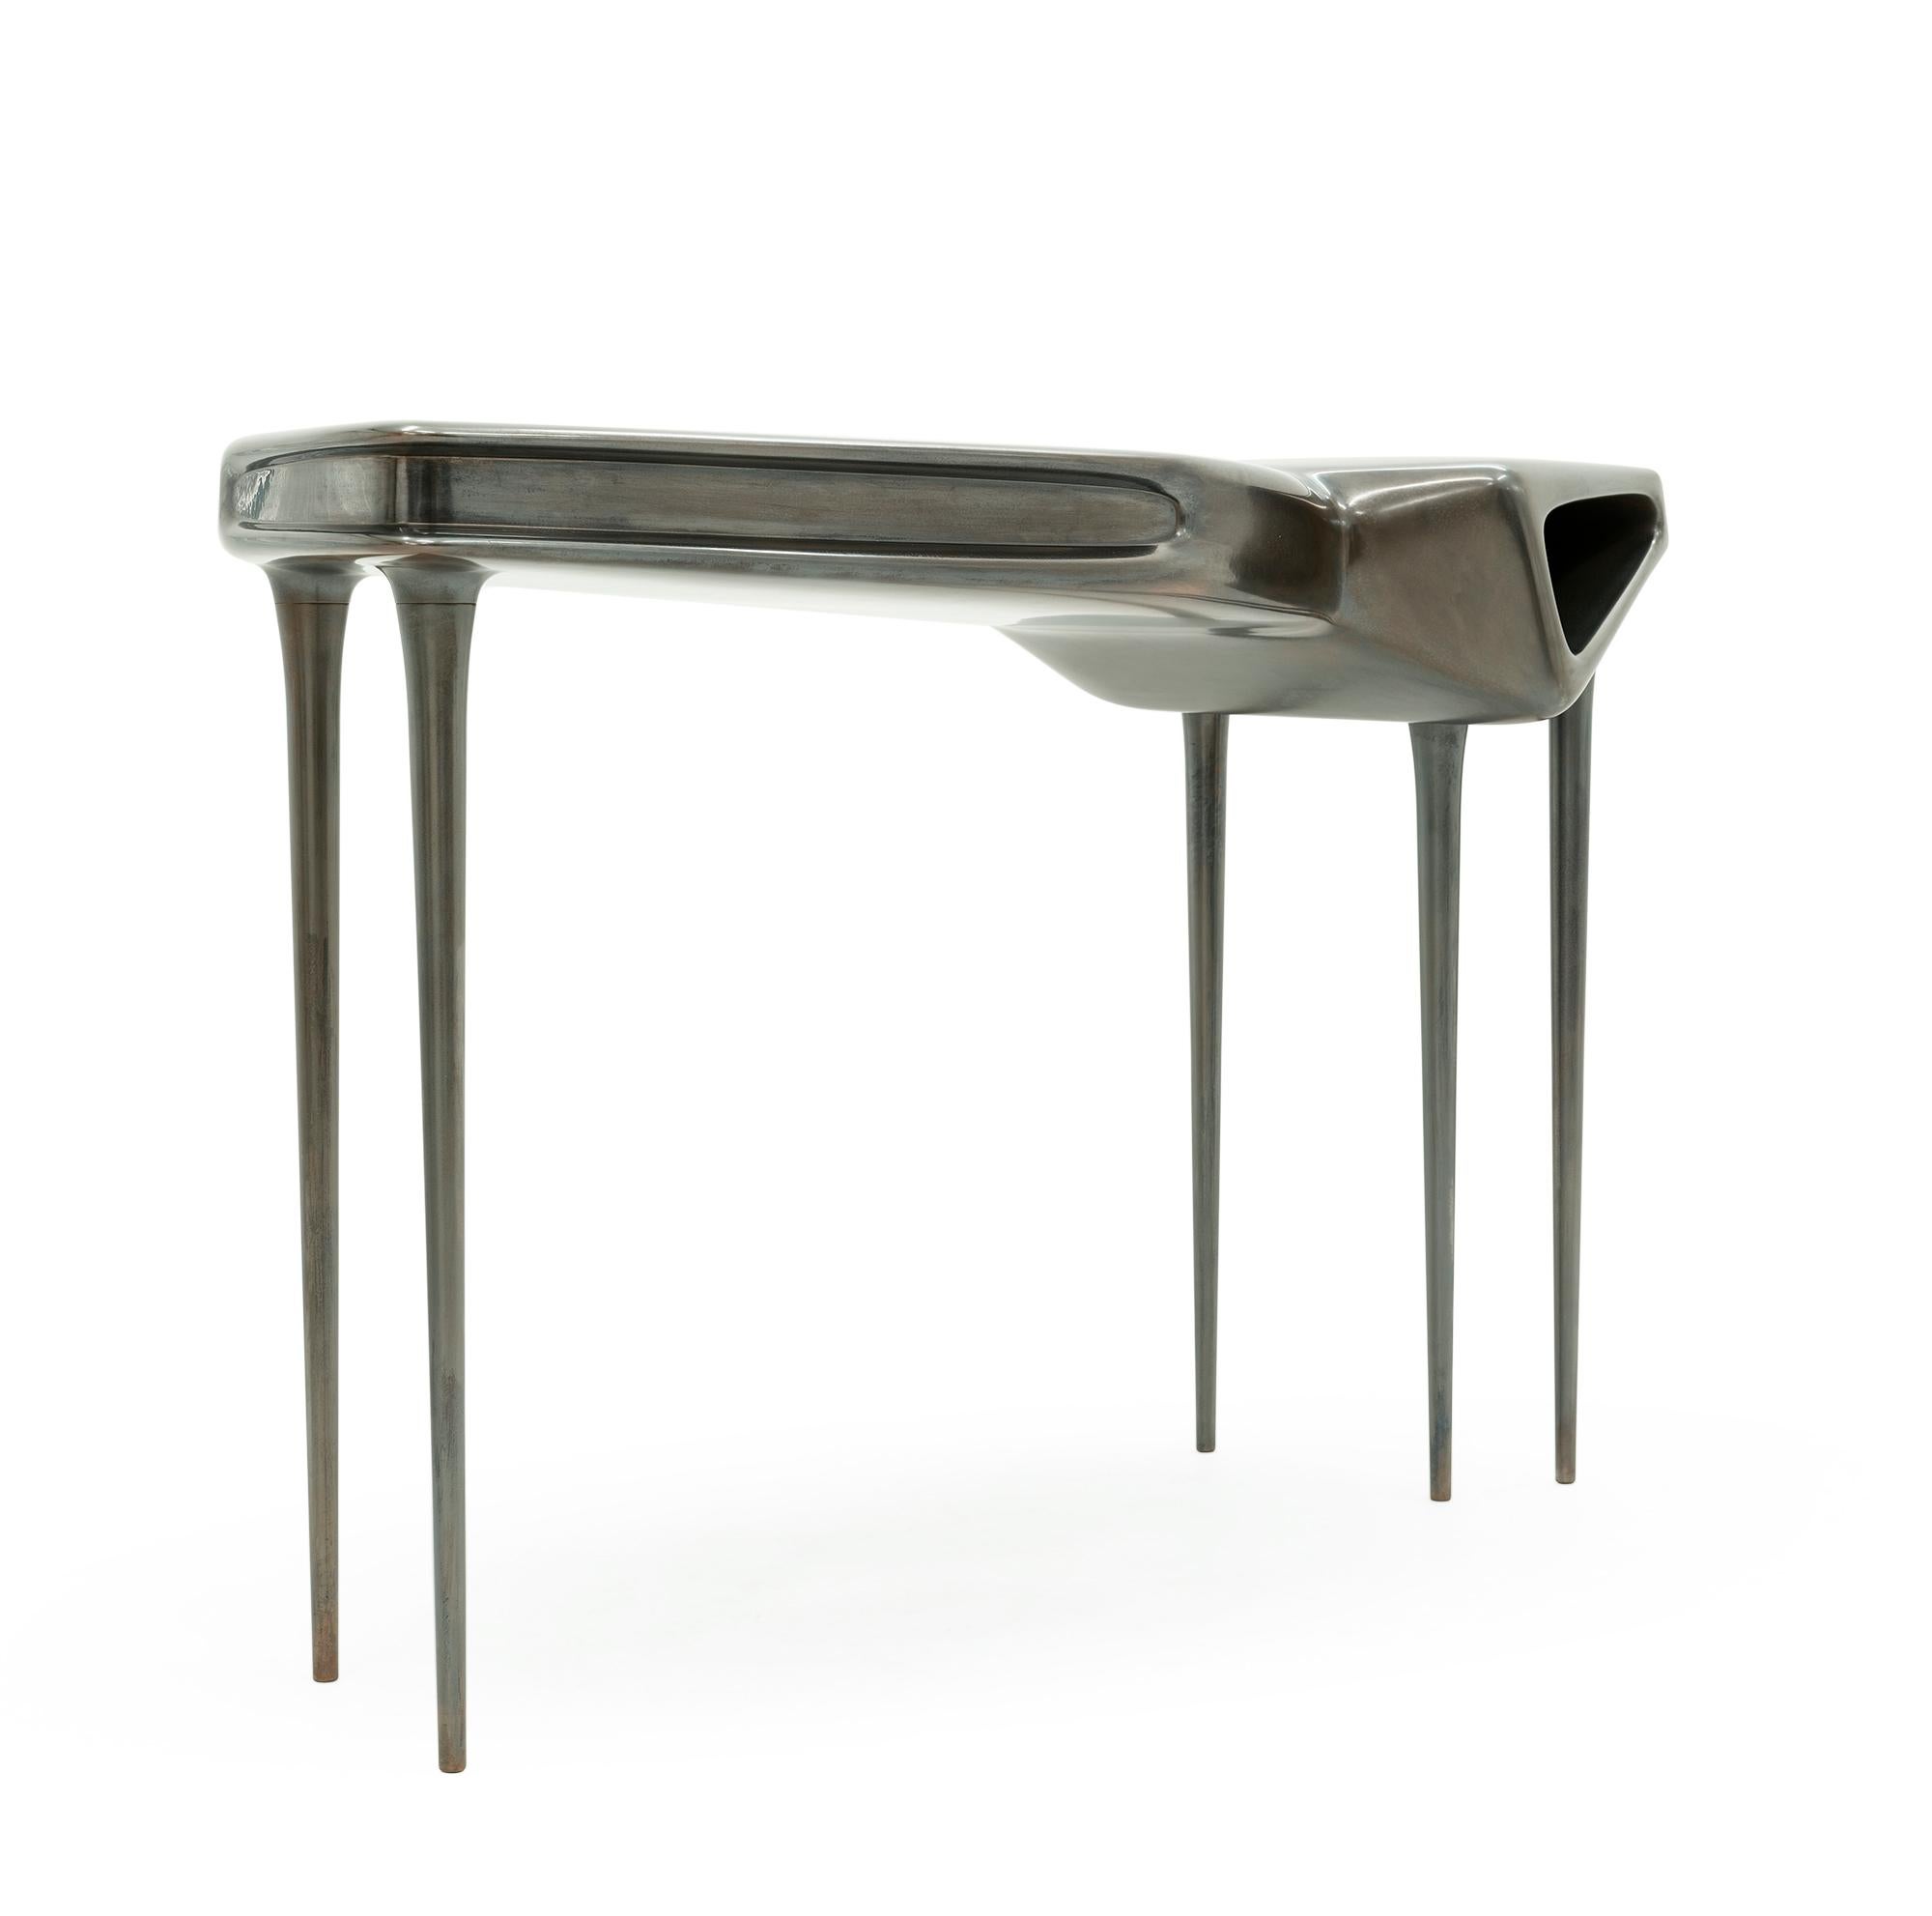 Grace console black - 21st century molded black oxidized carbon metal console

An oxidized carbon copy of the original liquid bronze Grace console, this one is made to be an affinitive accord between human thought and mystical animal, frozen in